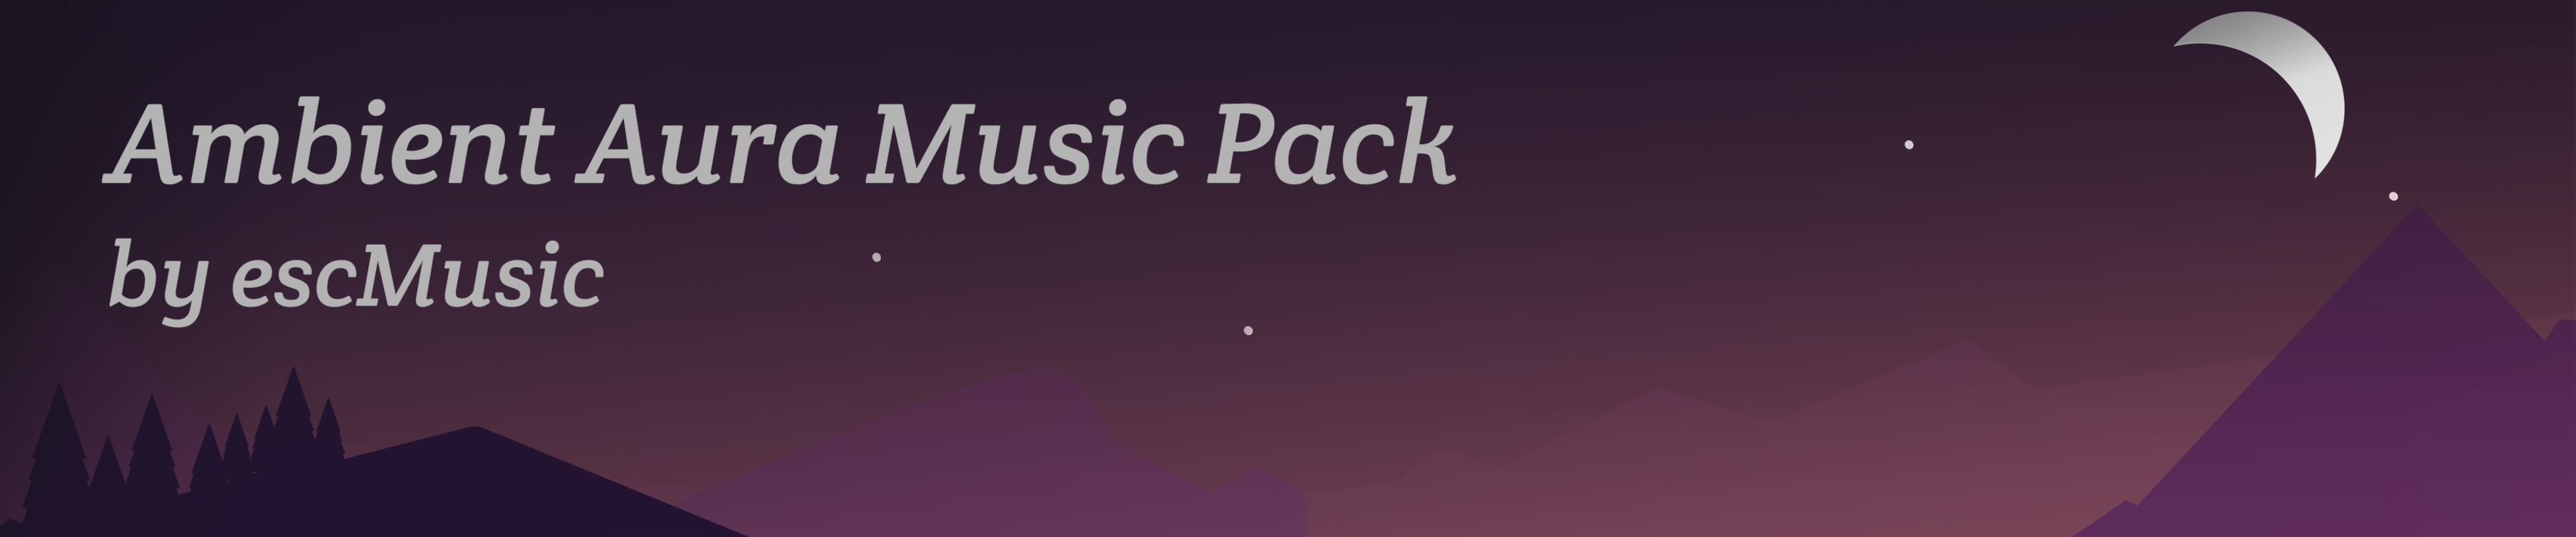 Ambient Aura Music Pack